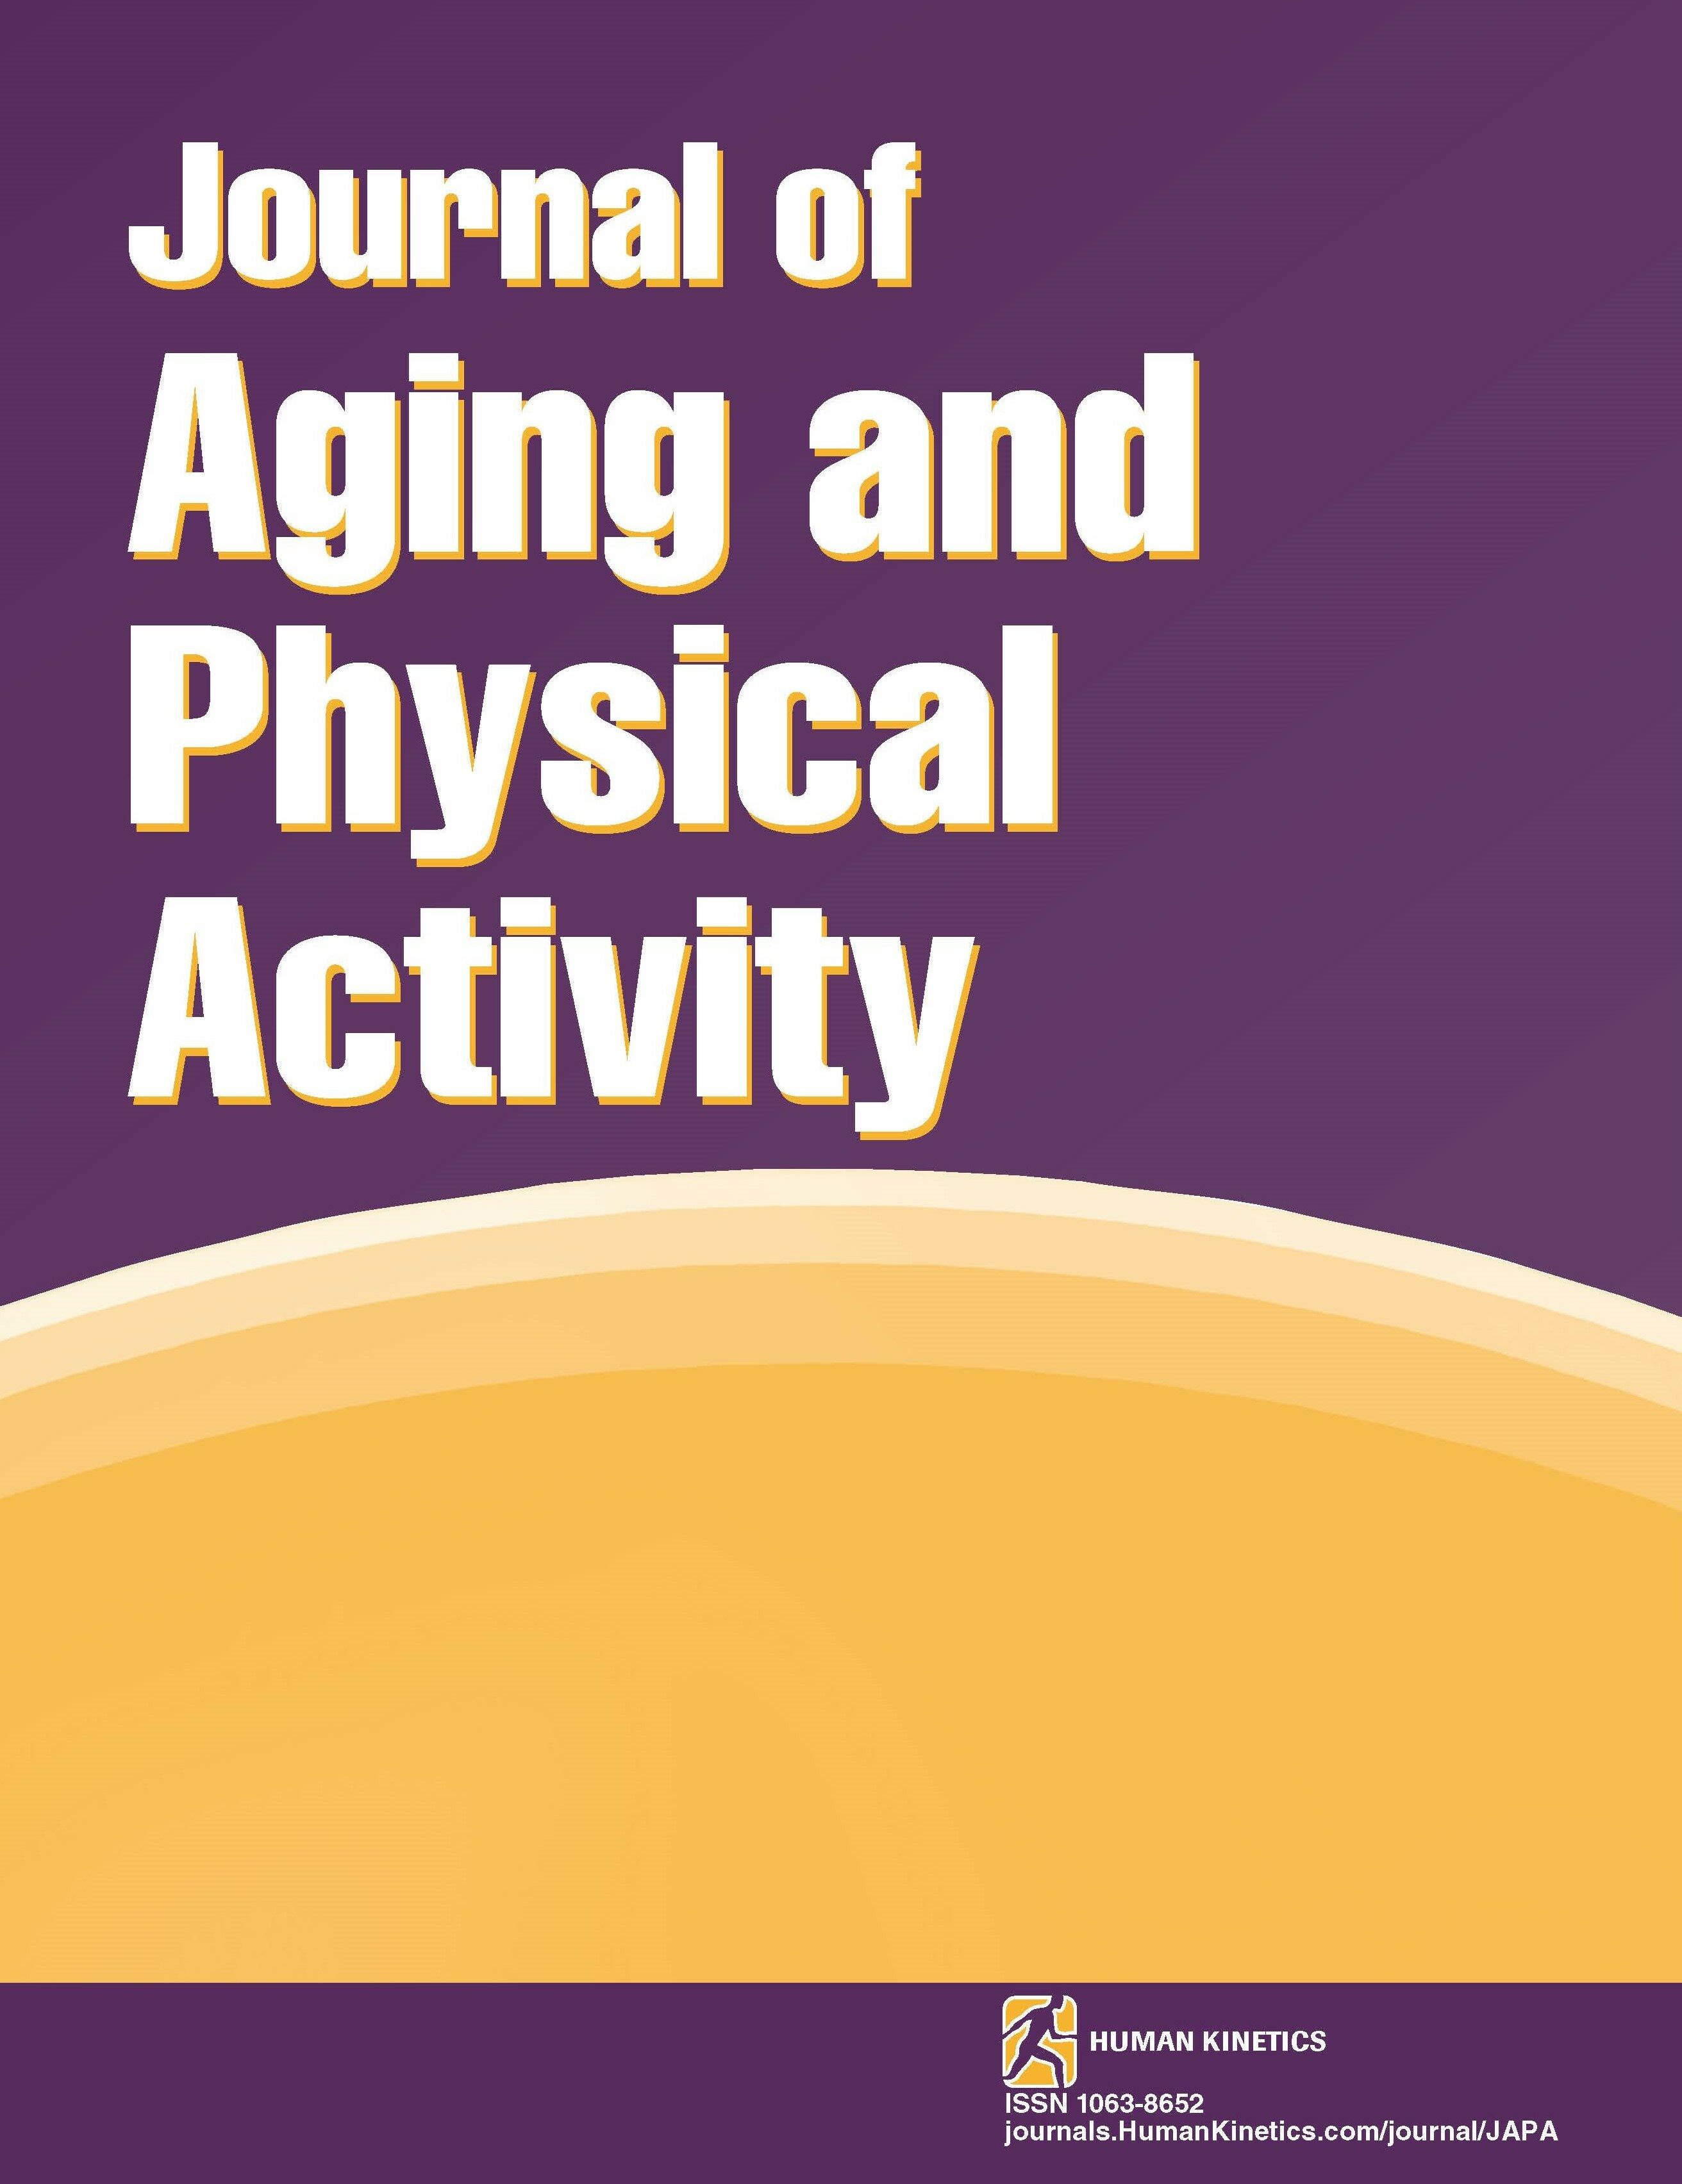 Framing Physical Literacy for Adults Through a Rehabilitation Lens: An Expert Consensus Study